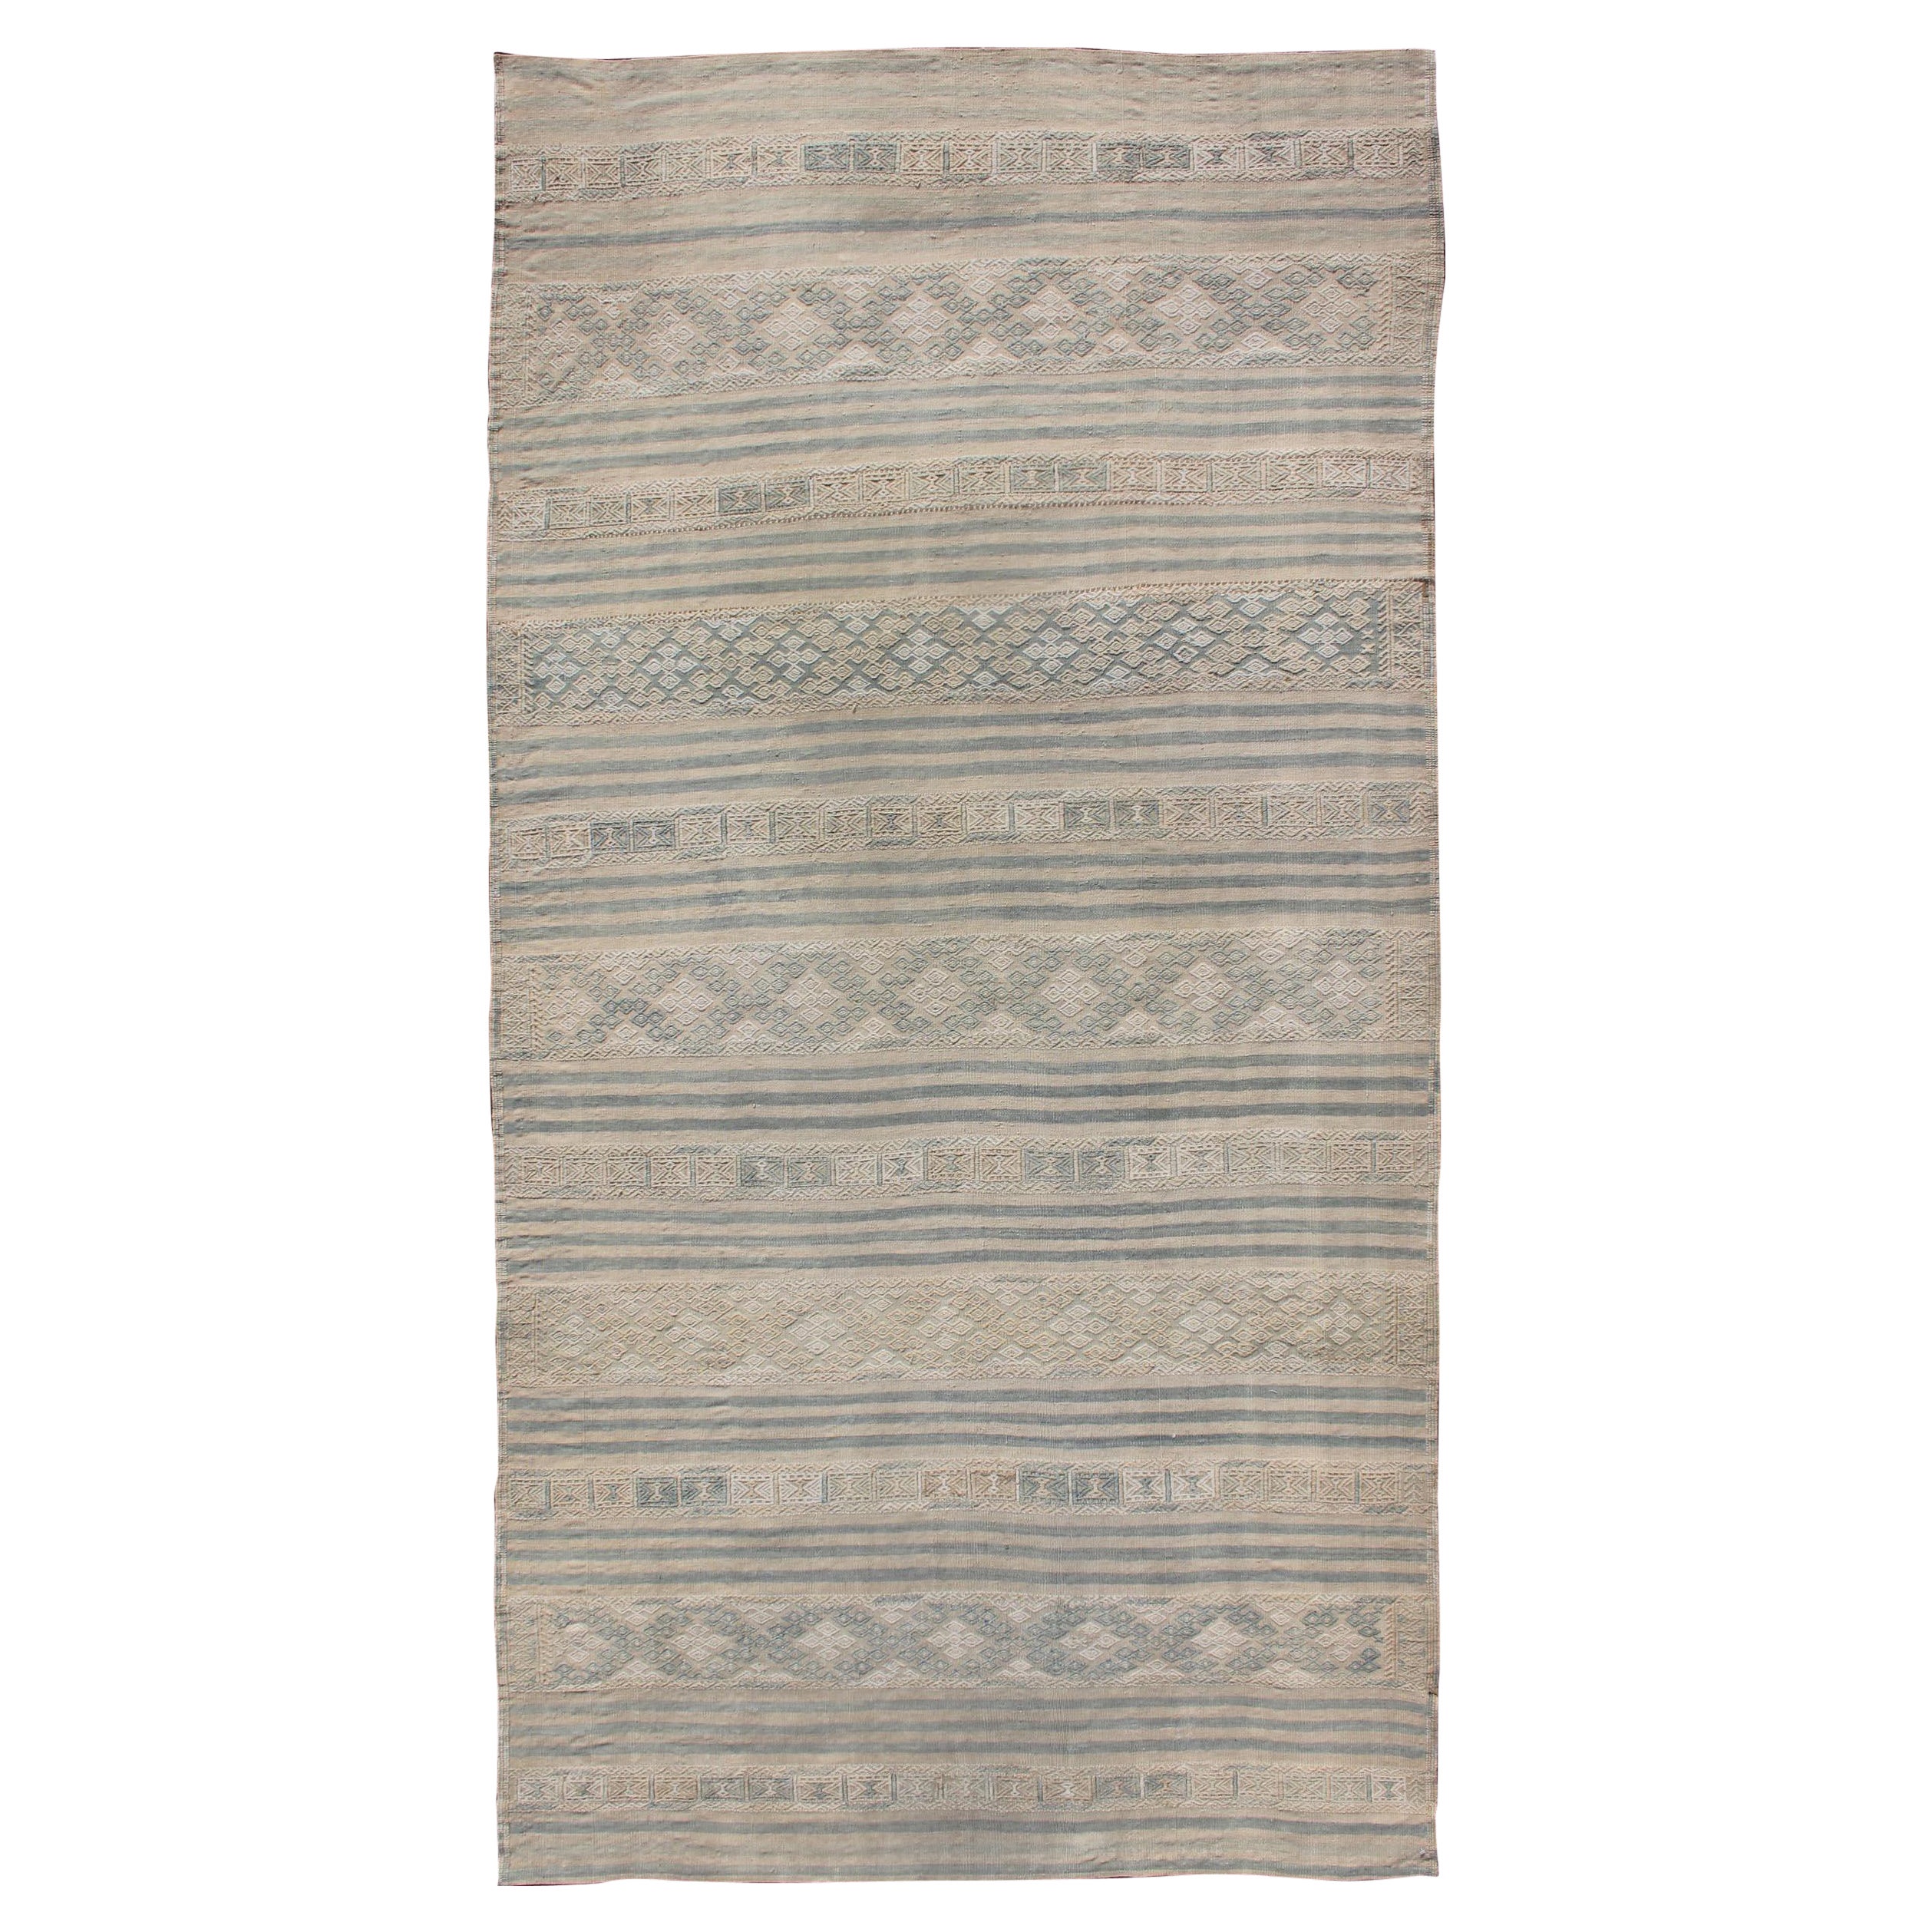 Flat-Weave Kilim with Embroideries in Taupe, Tan, Blue and Gray For Sale